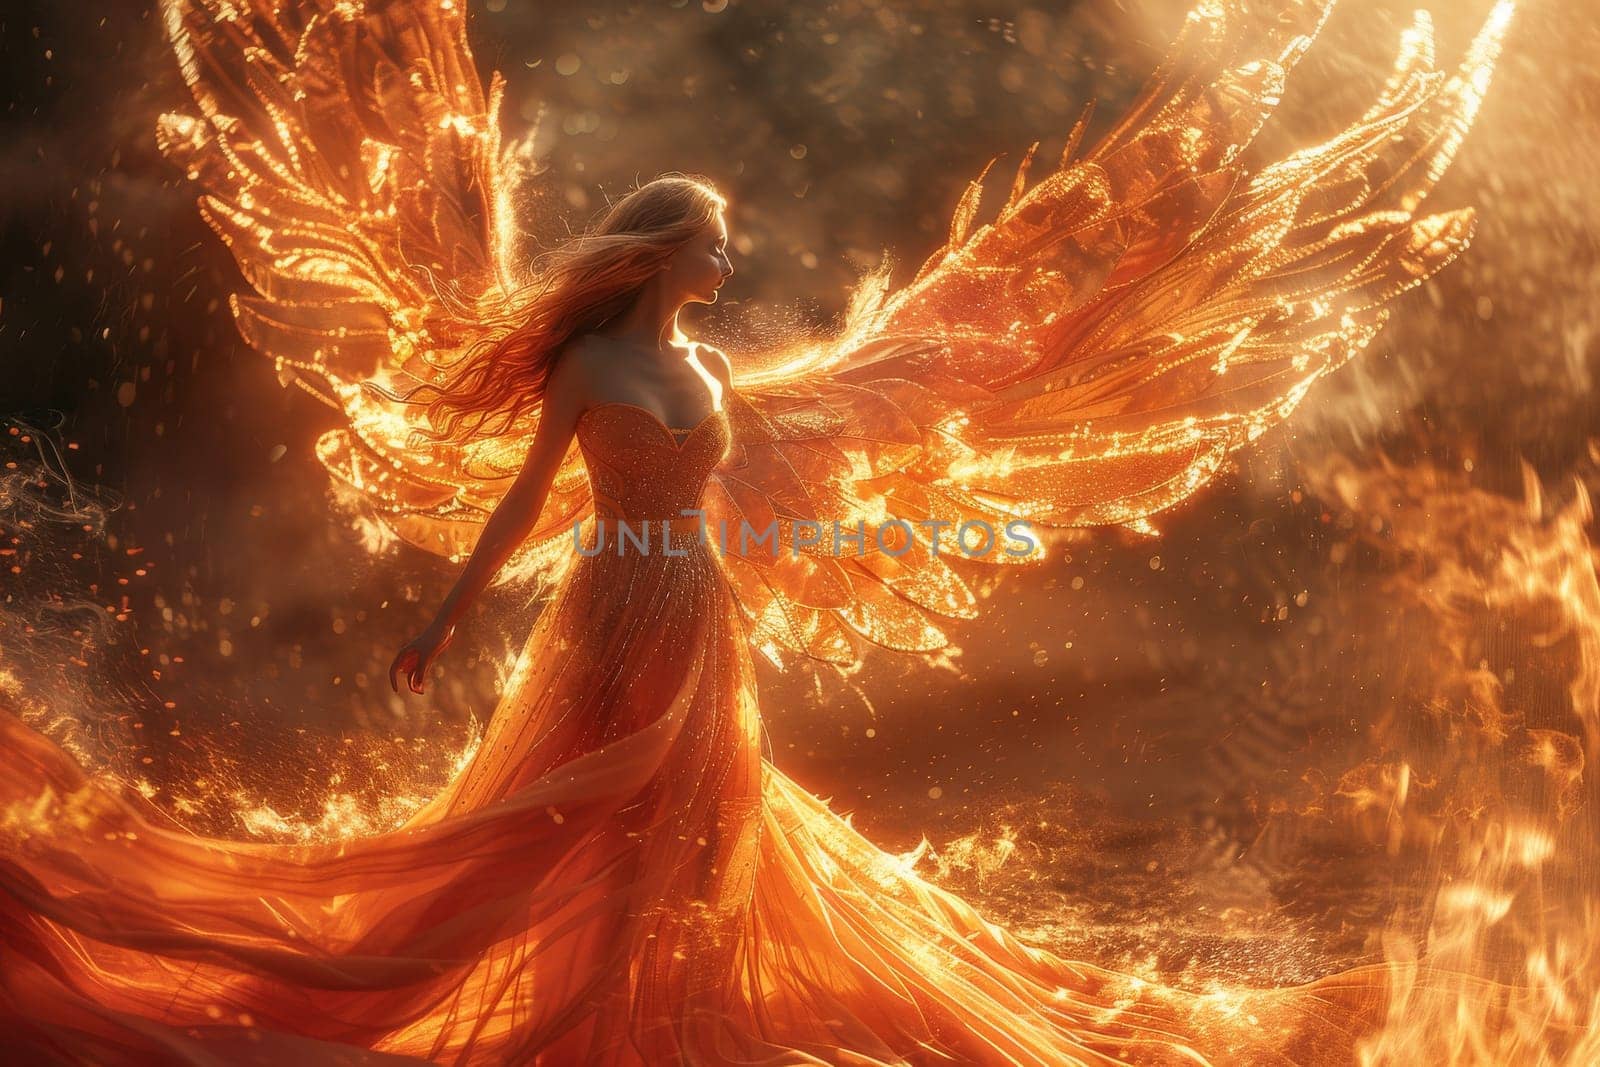 A woman with a Phoenix winged angelic appearance by itchaznong